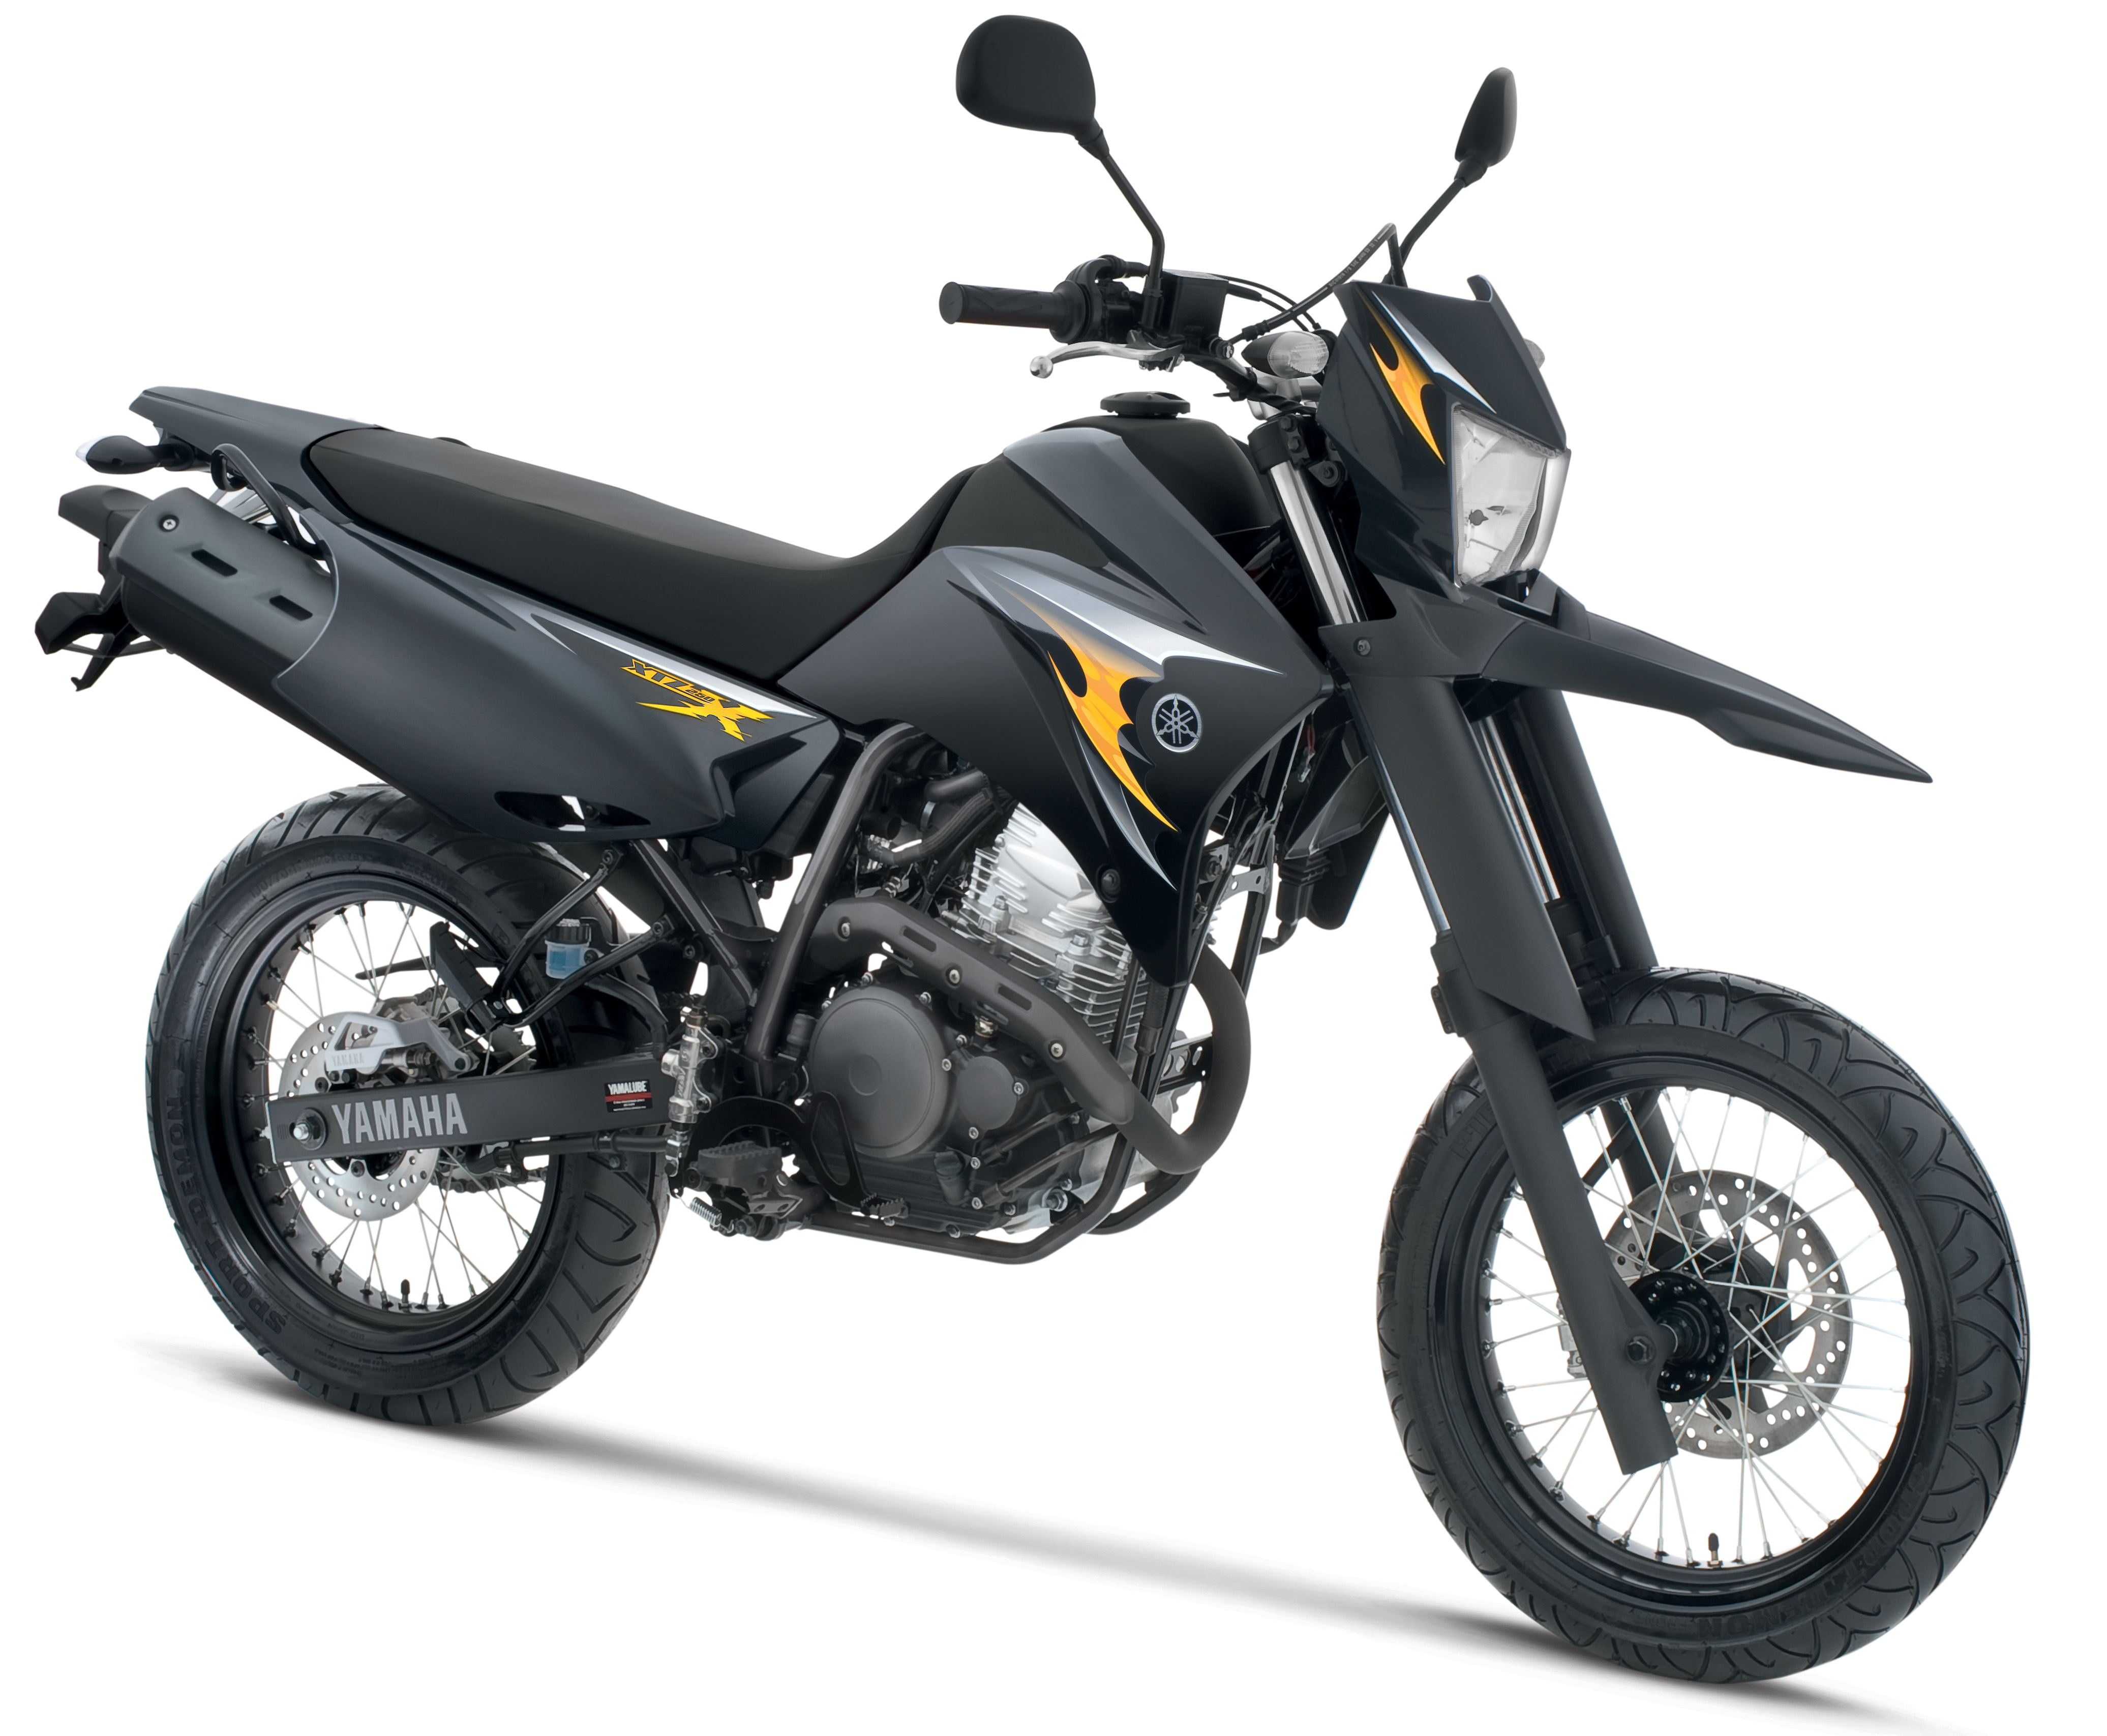 Horizons Unlimited - The HUBB - No Love for WR250R?